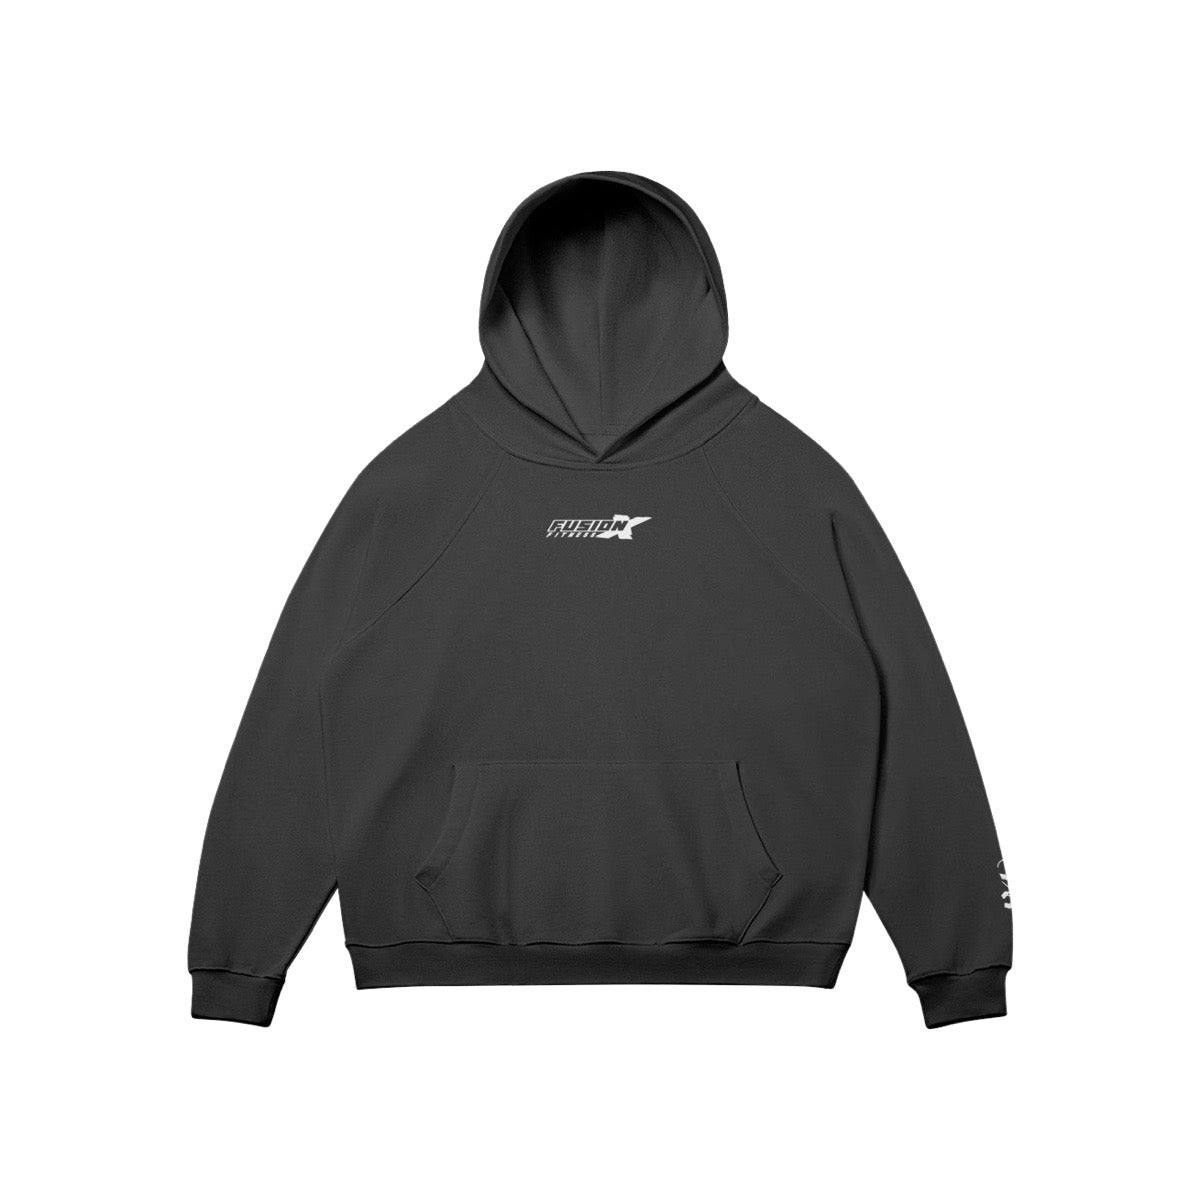 FusionX Strong Gym Hoodie